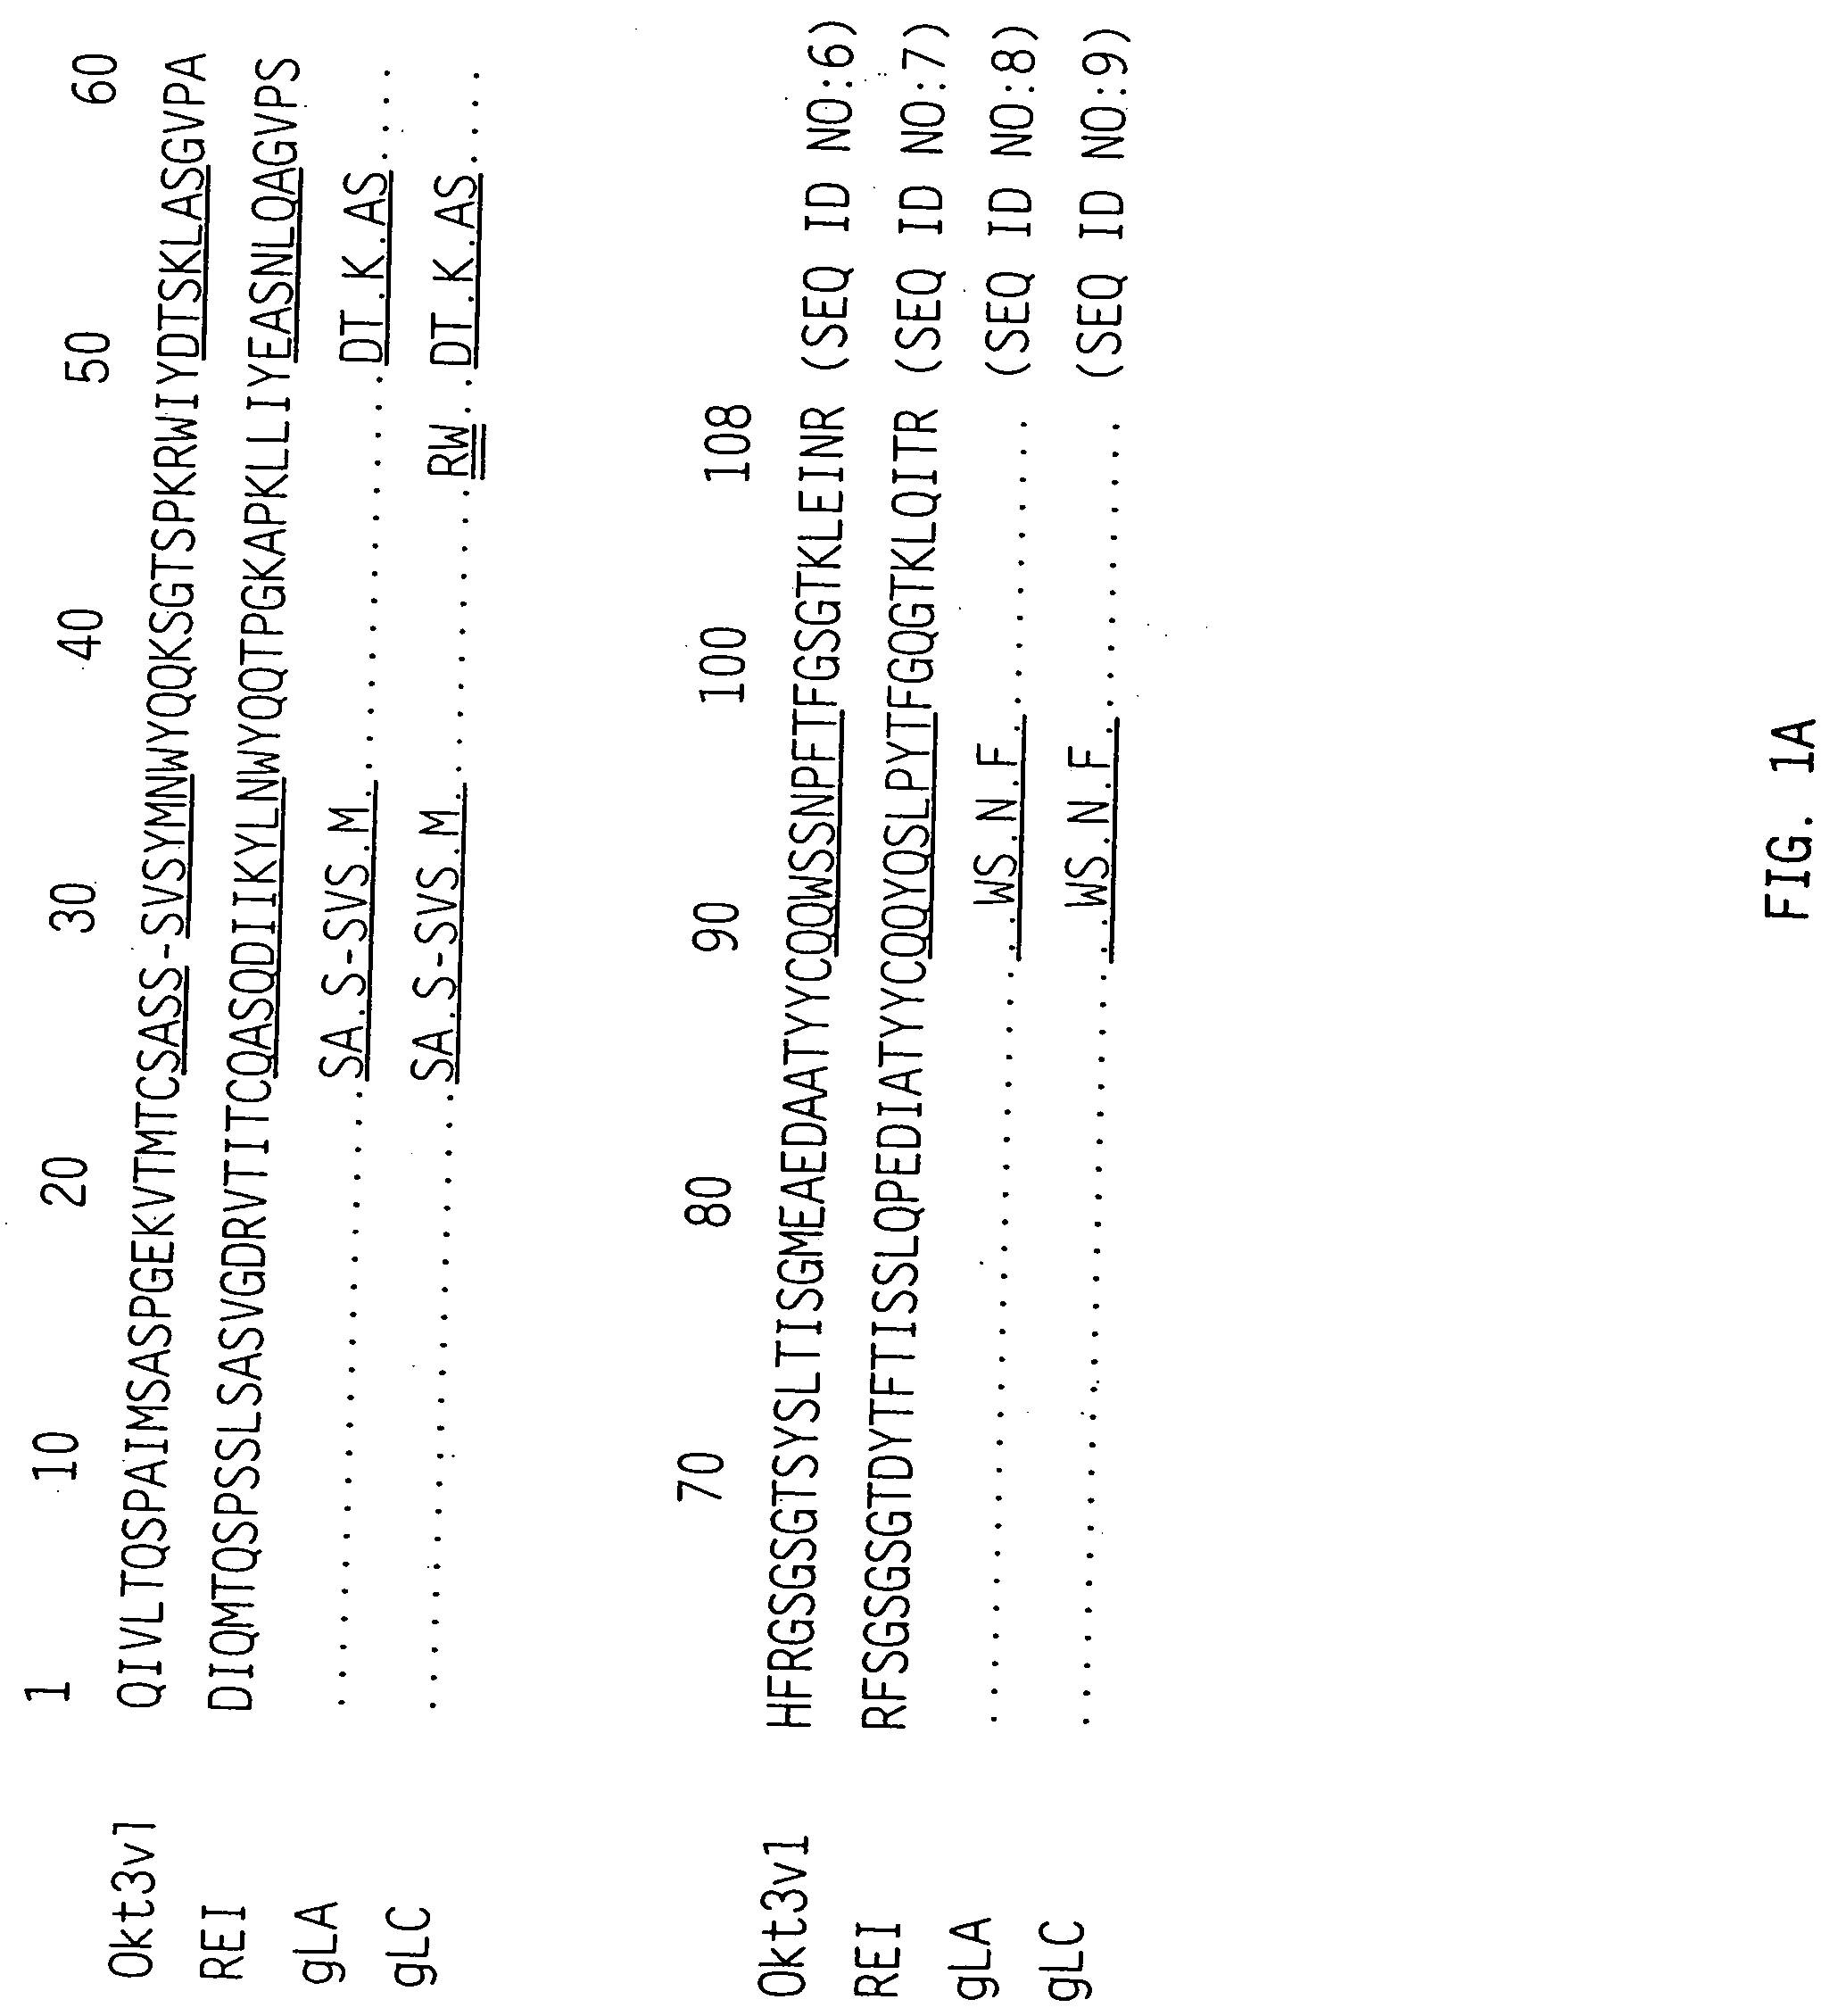 Methods and materials for modulation of the immunosuppressive activity and toxicity of monoclonal antibodies